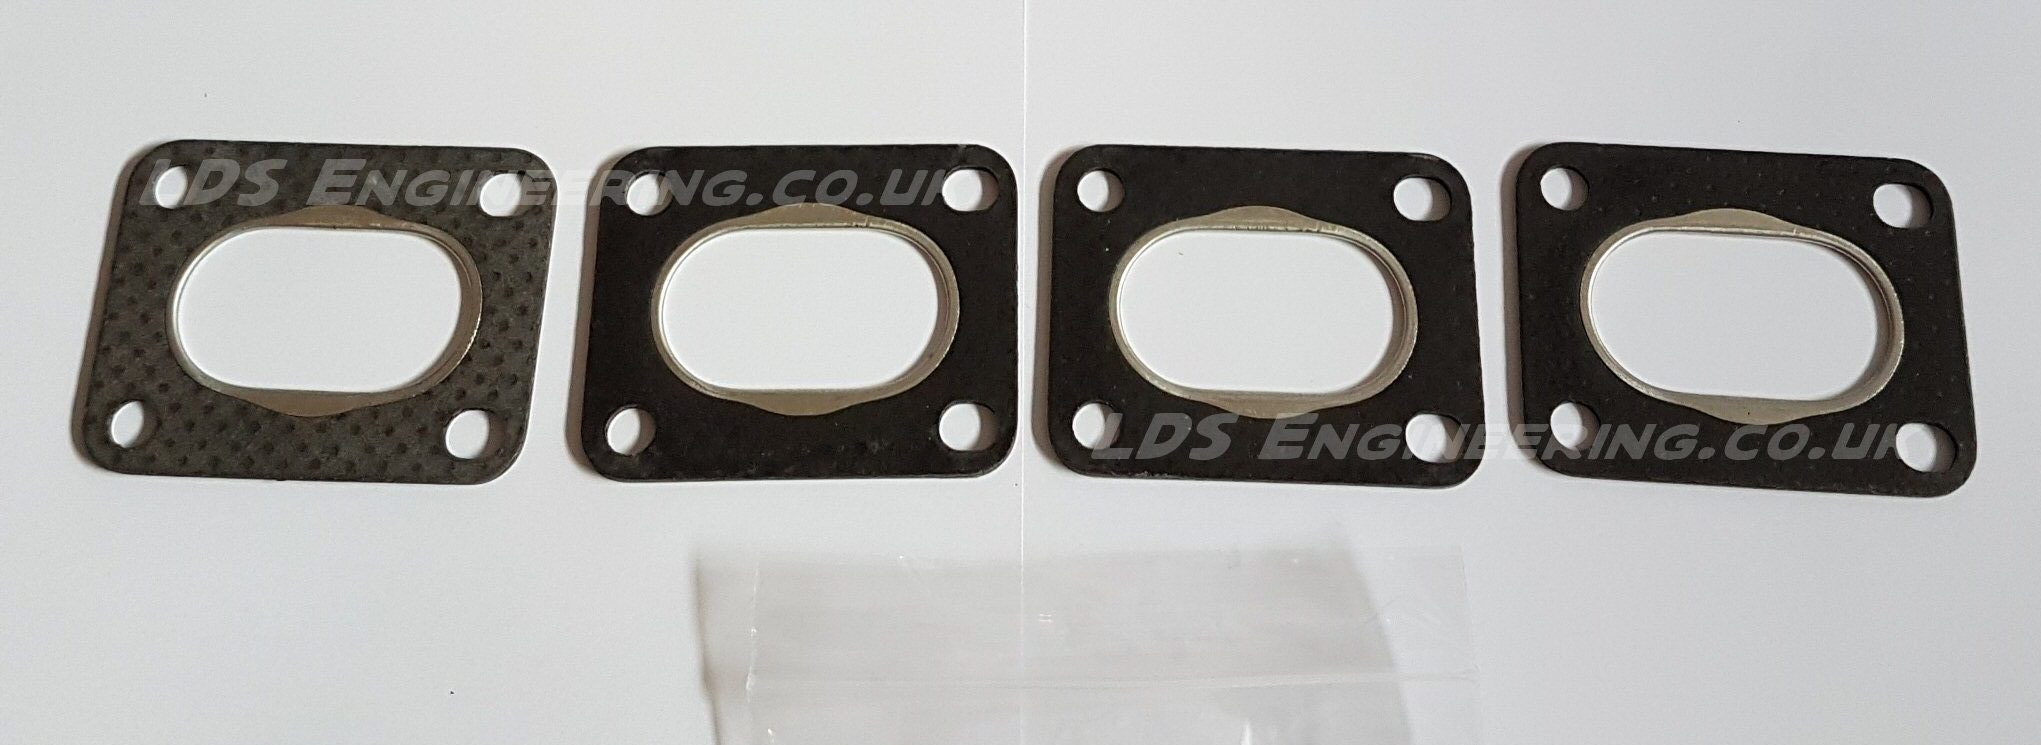 UJC999 RS Cosworth exhaust gasket set